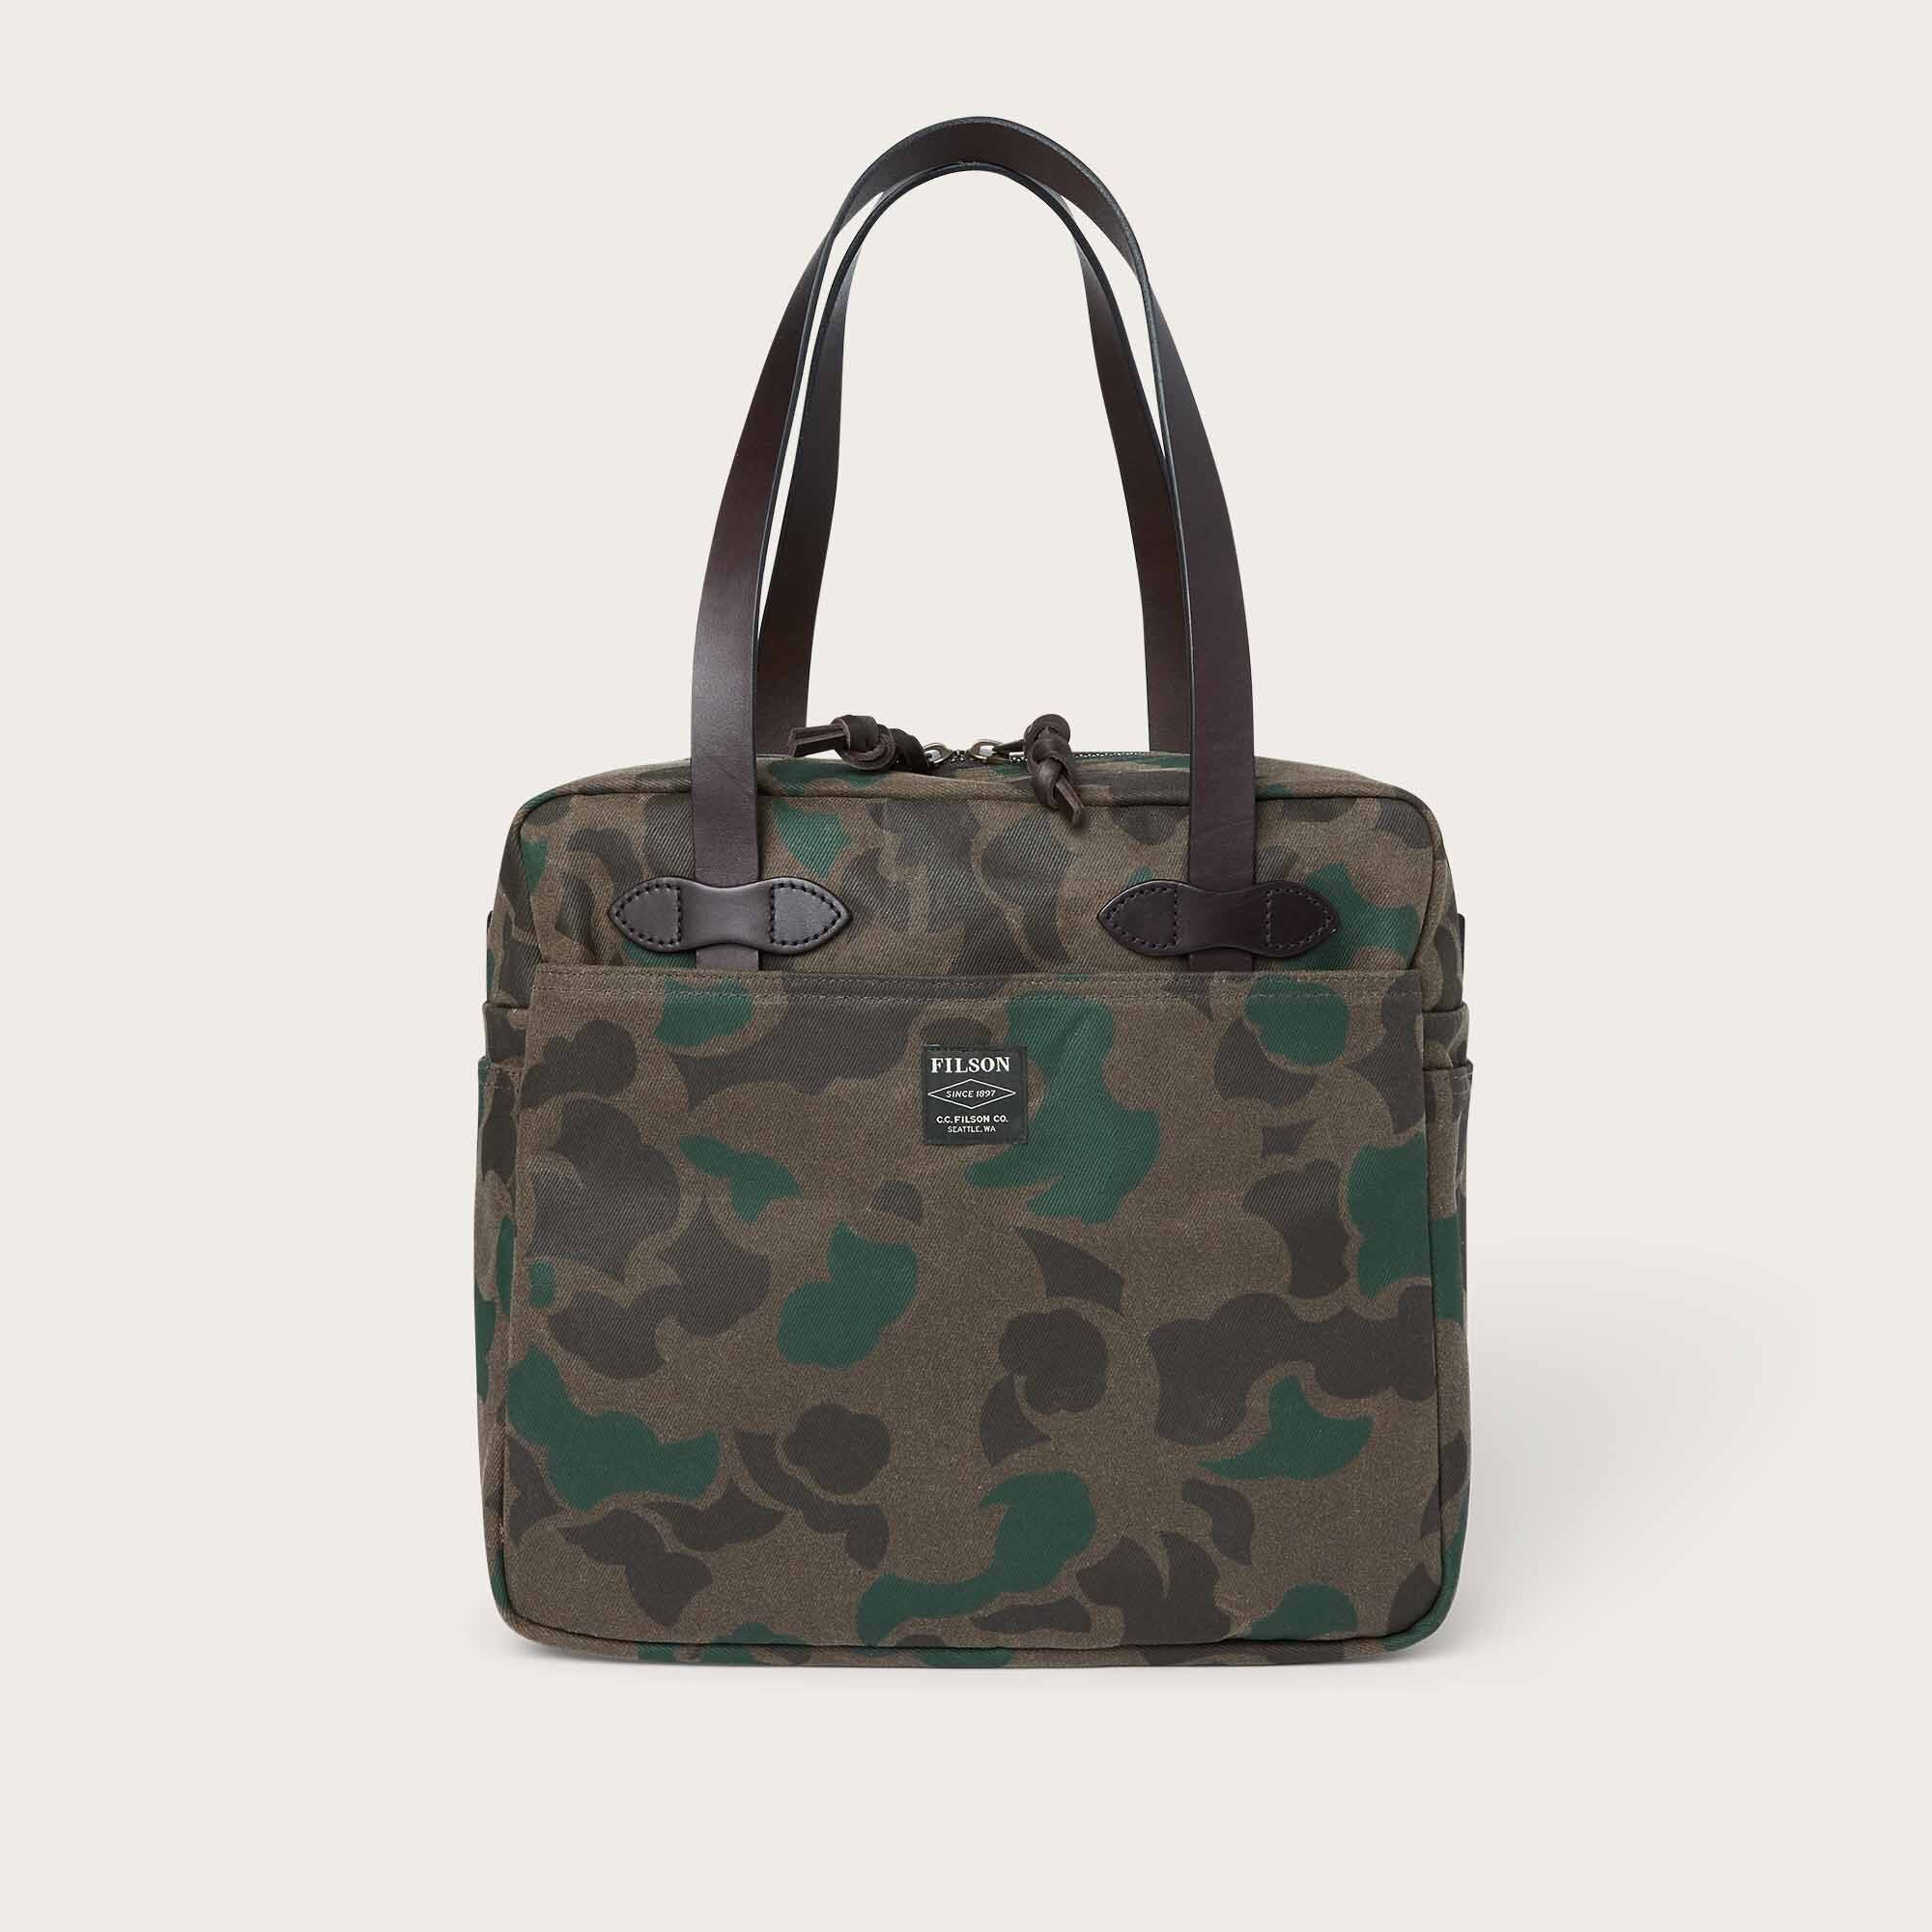 WAXED RUGGED TWILL TOTE BAG WITH ZIPPER – Filson Europe